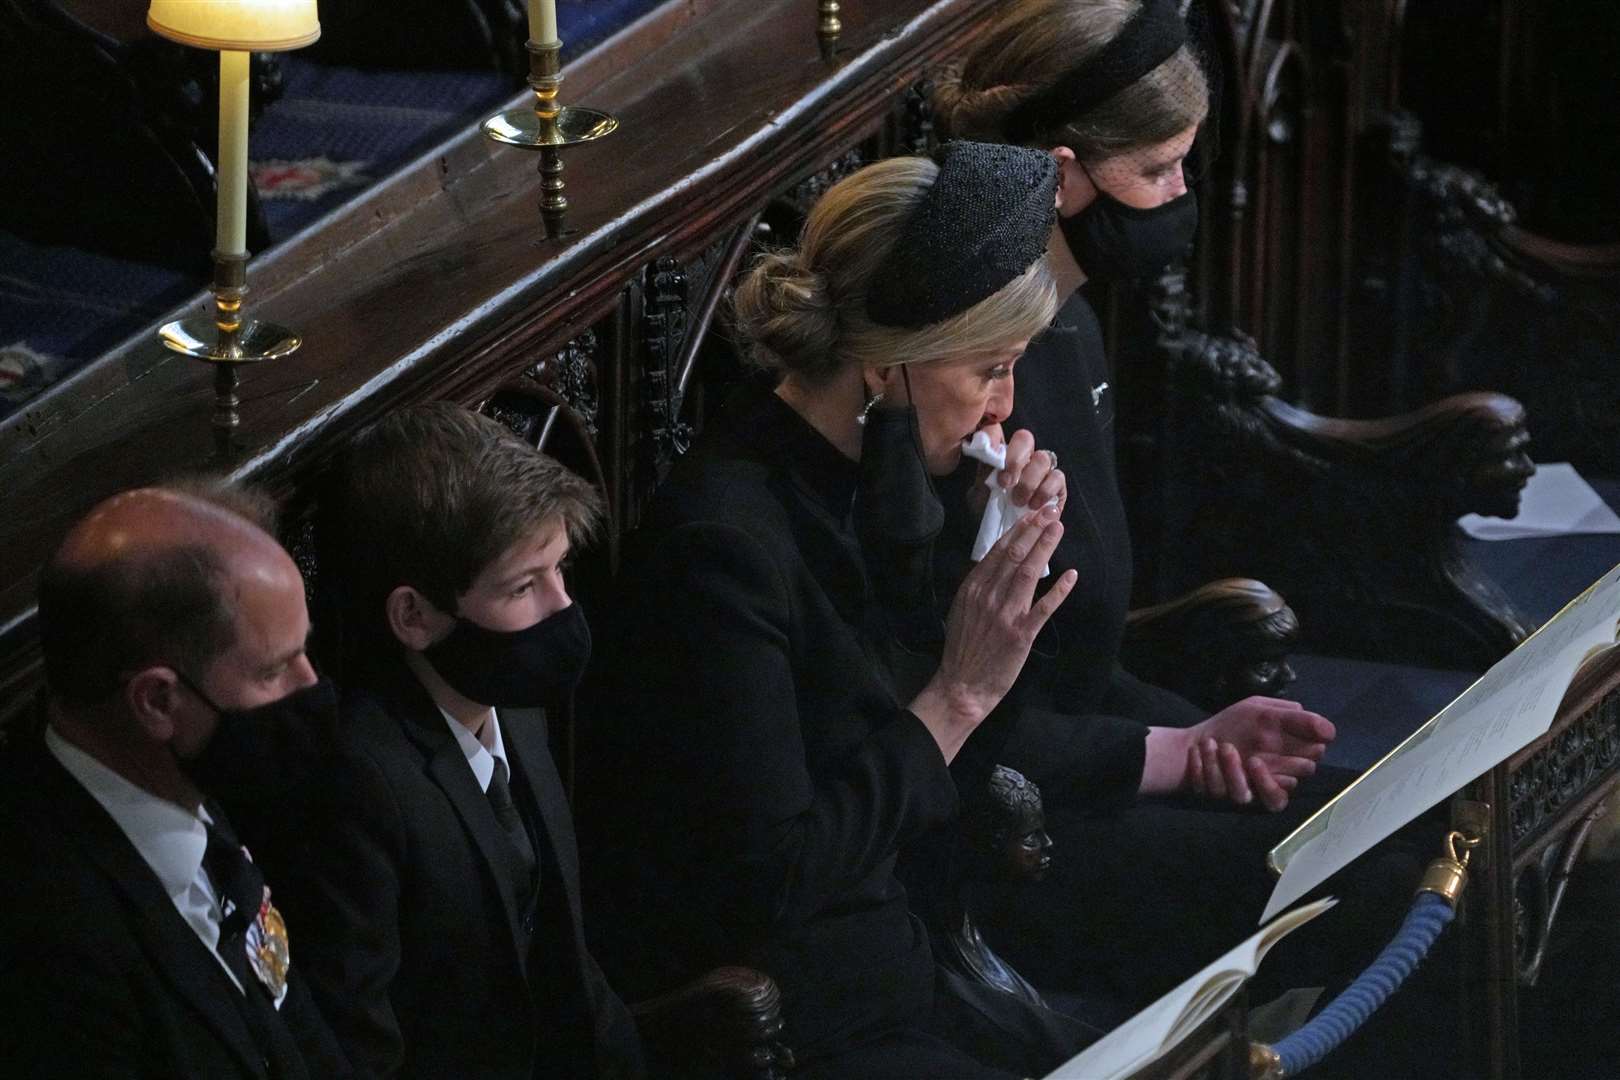 The Earl of Wessex, Viscount Severn, the Countess of Wessex and Lady Louise Windsor during the funeral (Yui Mok/PA)